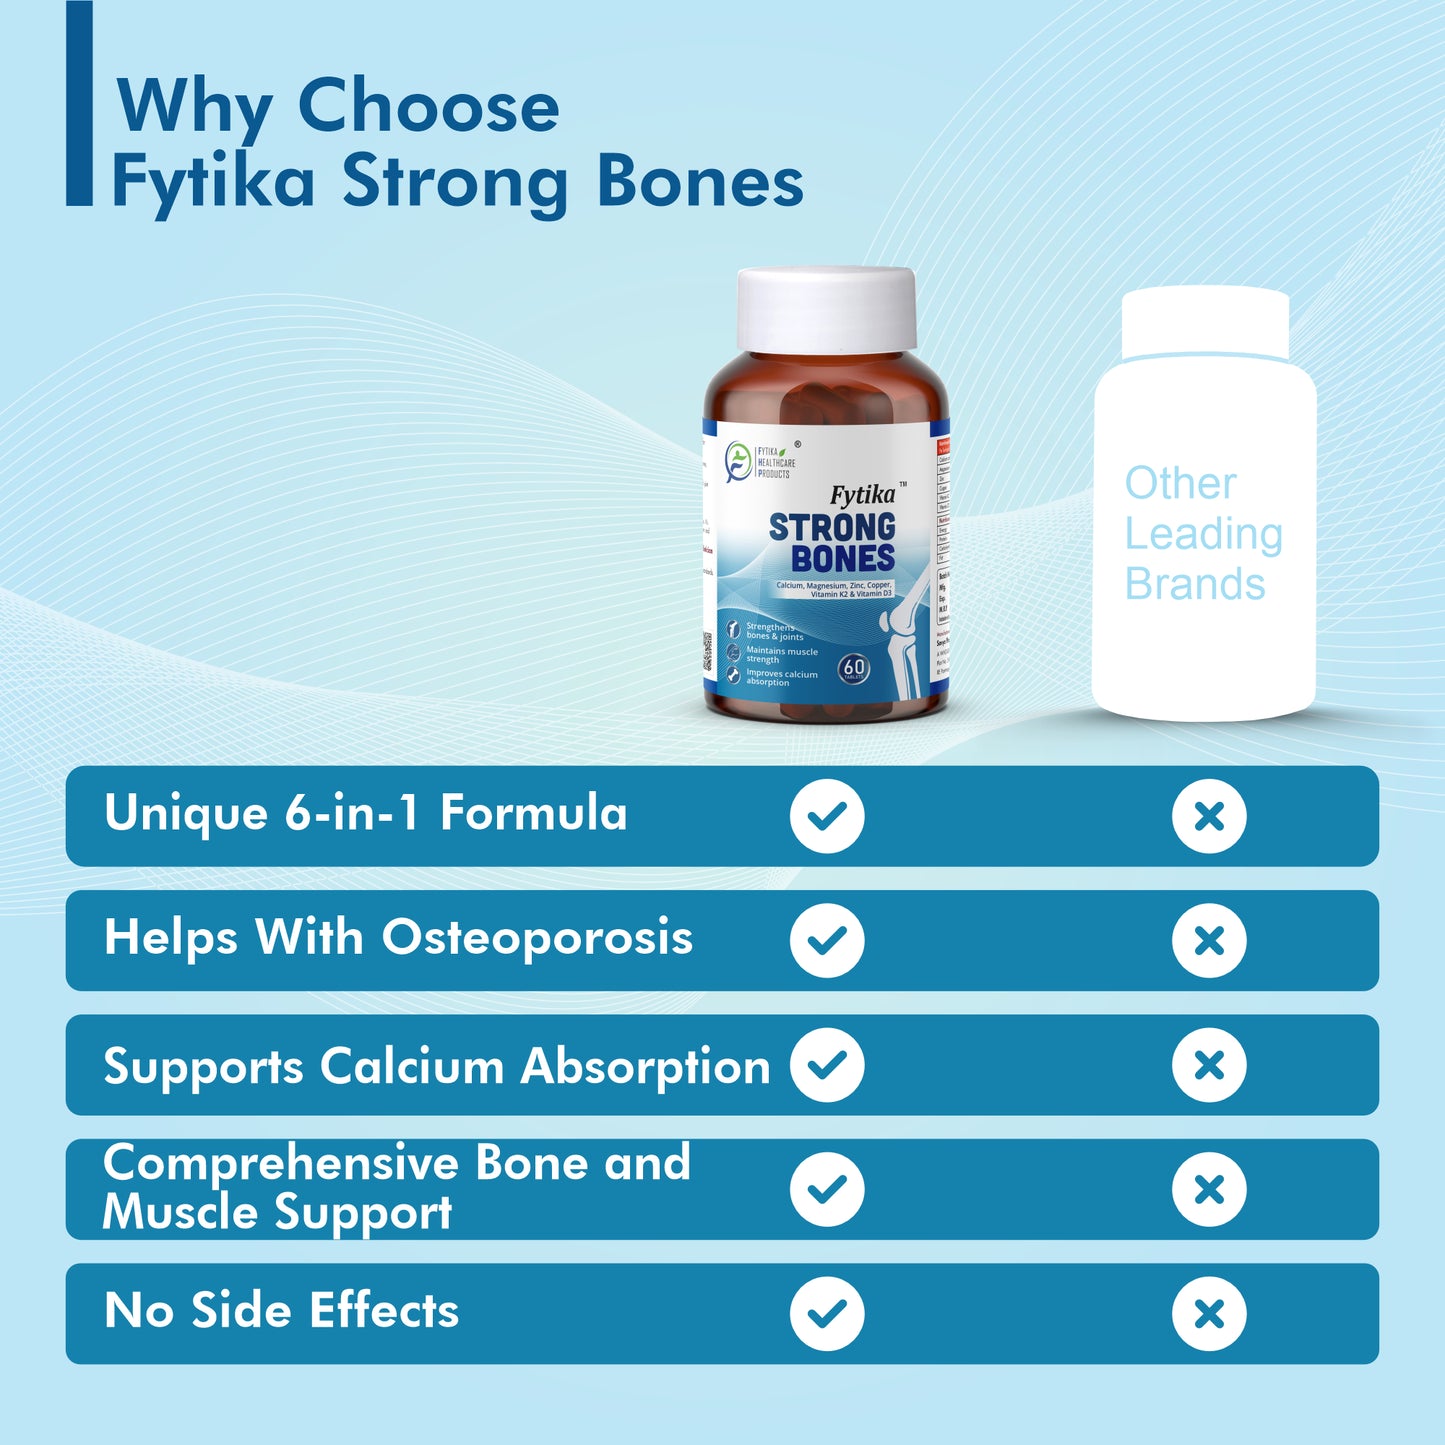 Get FREE Fytika Strong Bones with Fytika Omega 1000